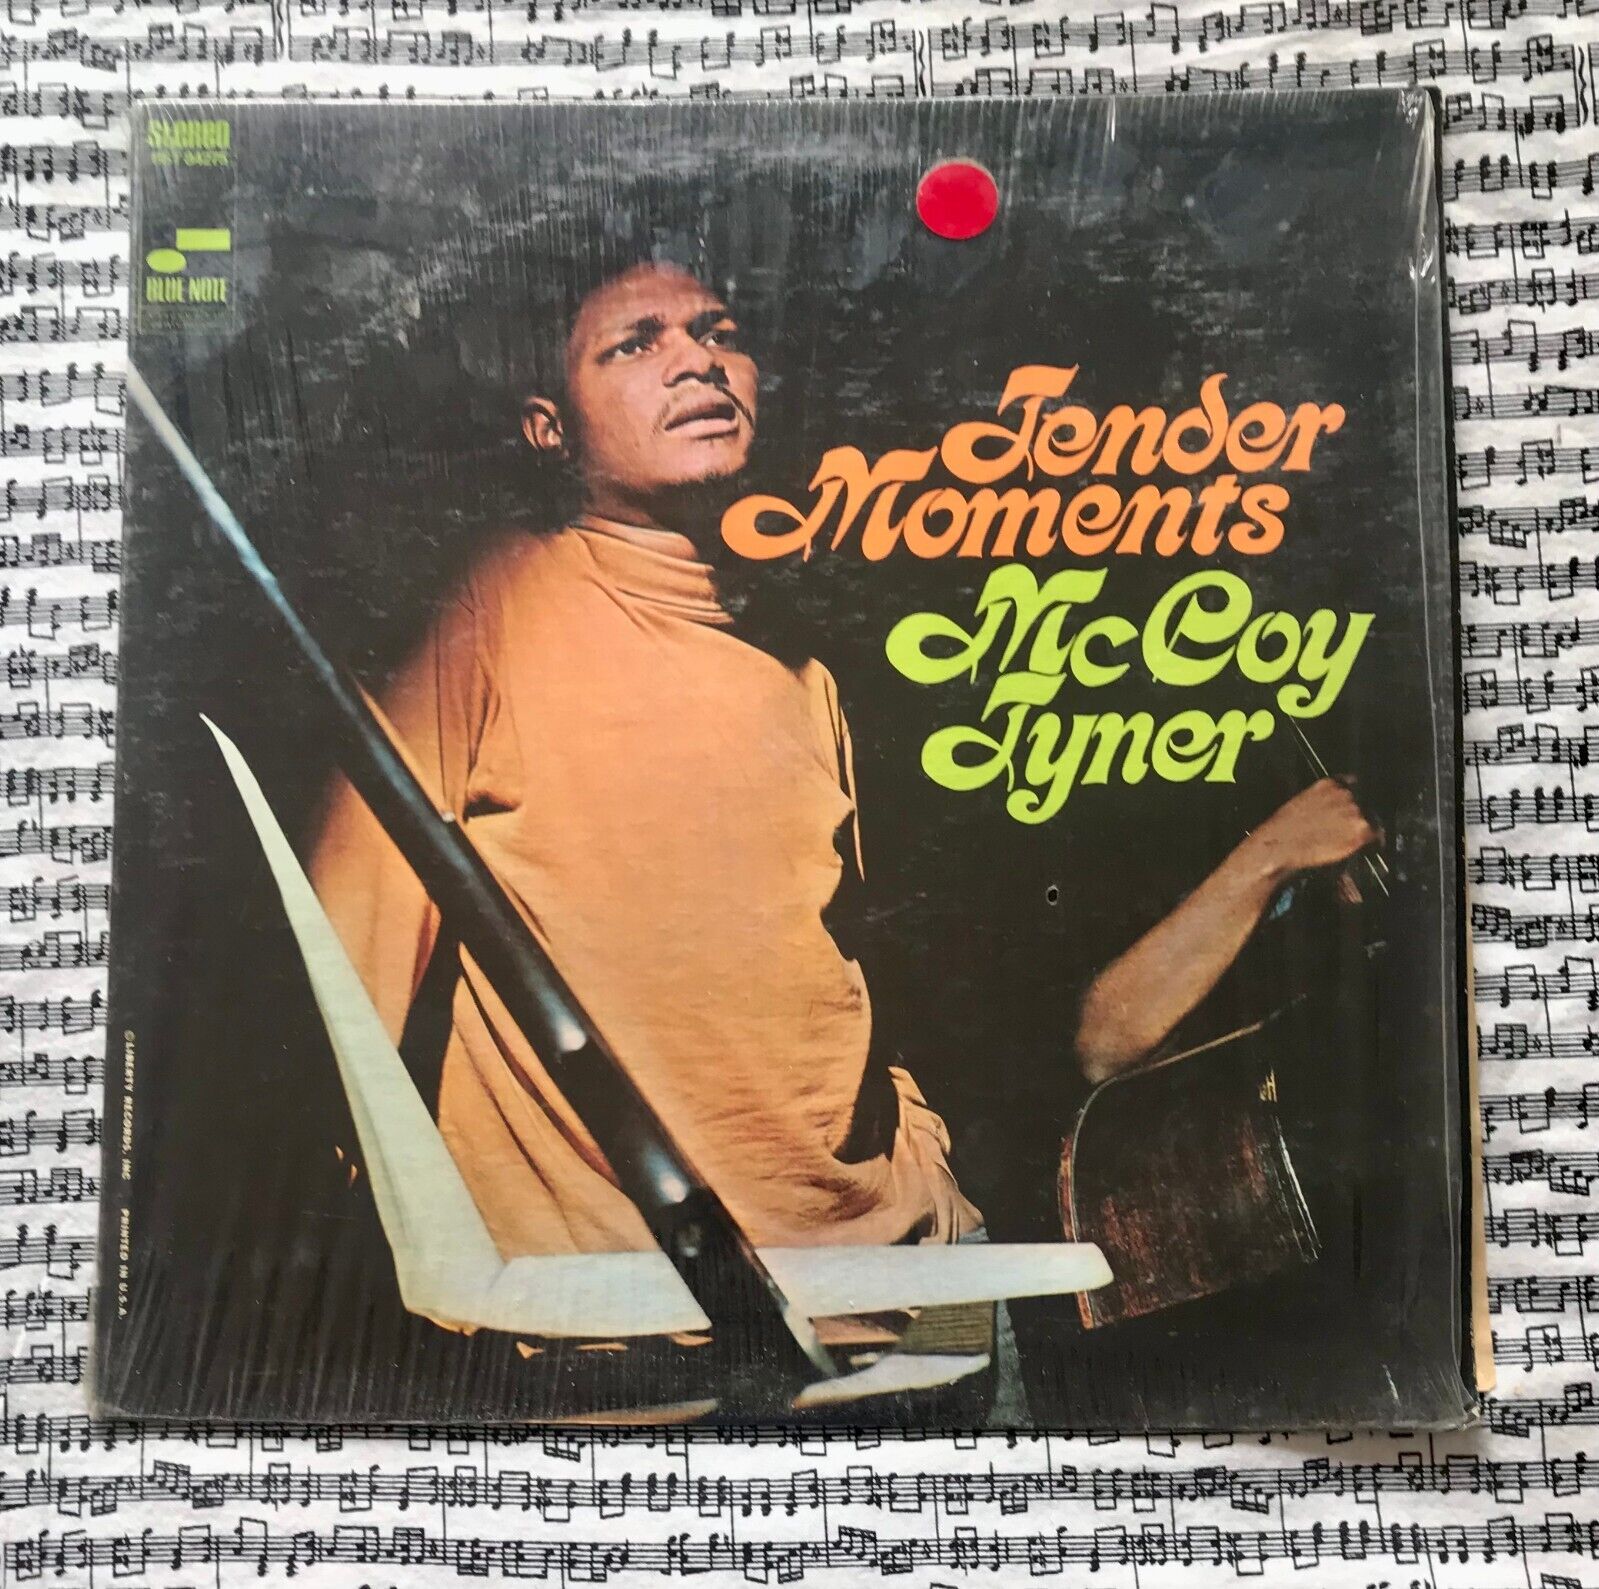 McCoy Tyner – Tender Moments 1968 Blue Note LP BST 84275 SIS Play Tested = EX